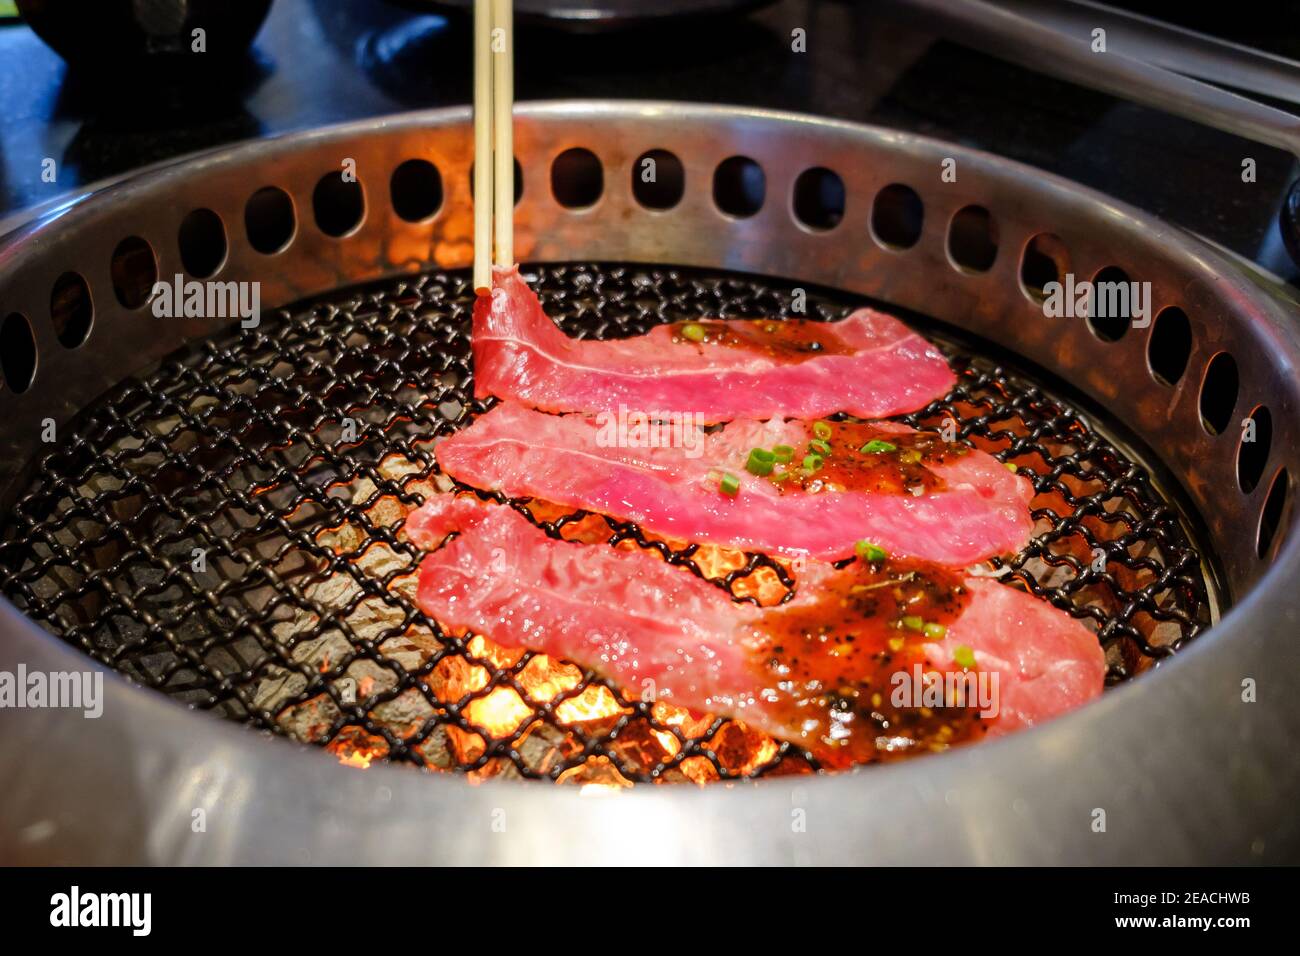 https://c8.alamy.com/comp/2EACHWB/close-up-raw-beef-slice-on-the-grill-over-charcoal-on-stovejapanese-style-yakiniku-2EACHWB.jpg